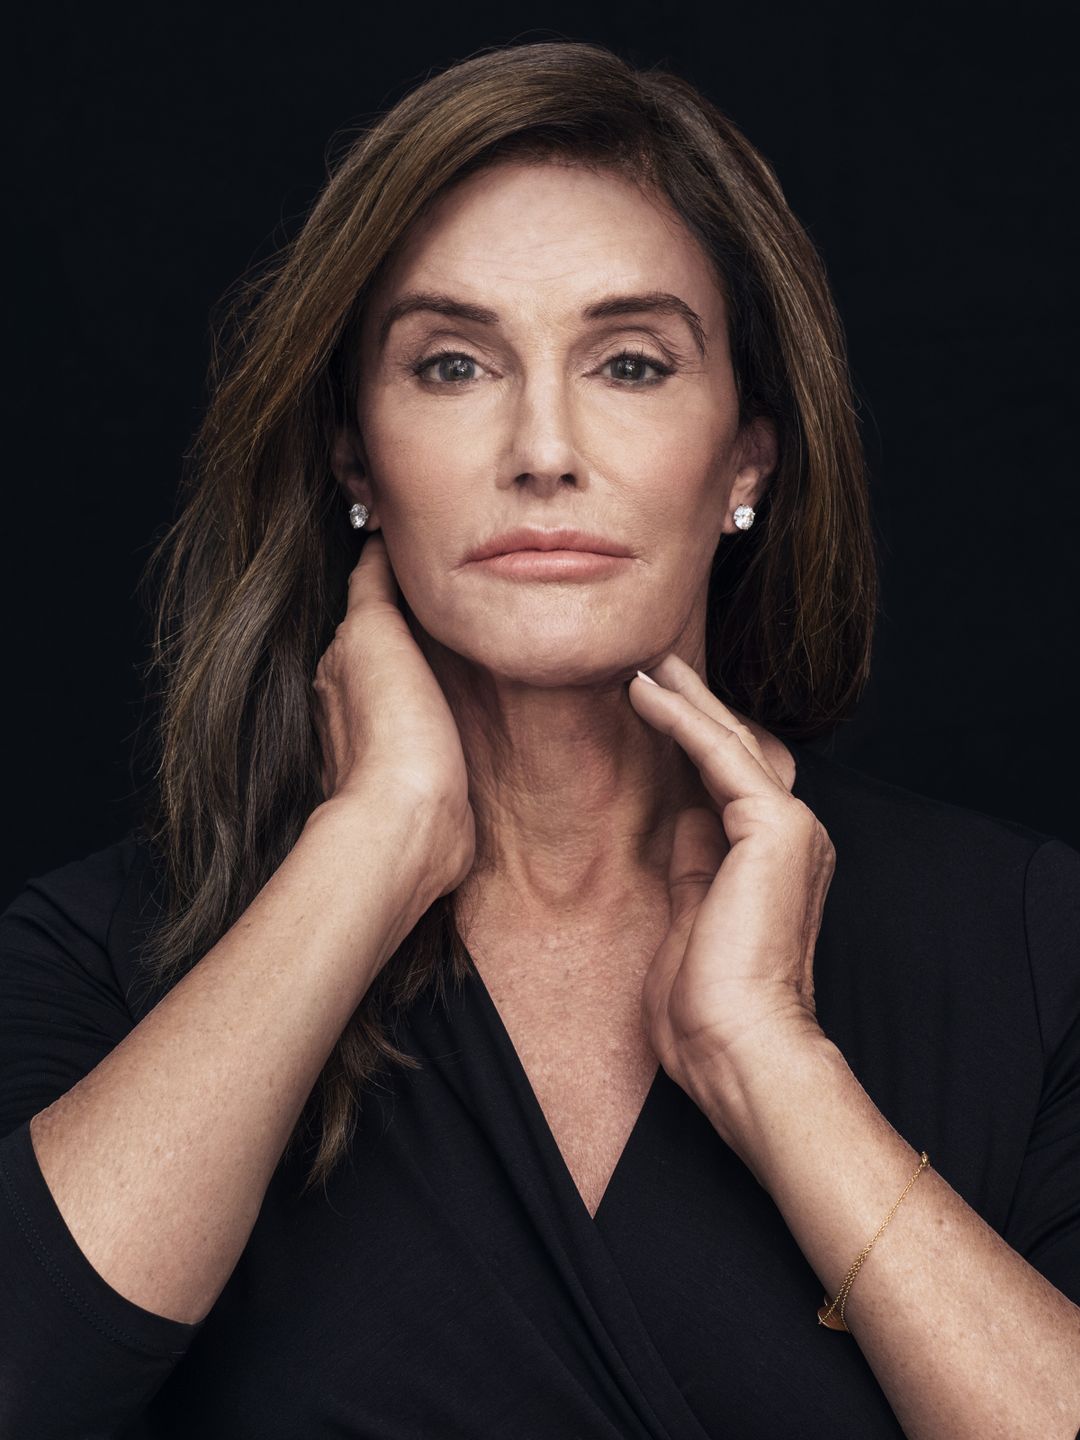 Caitlyn Jenner way to success